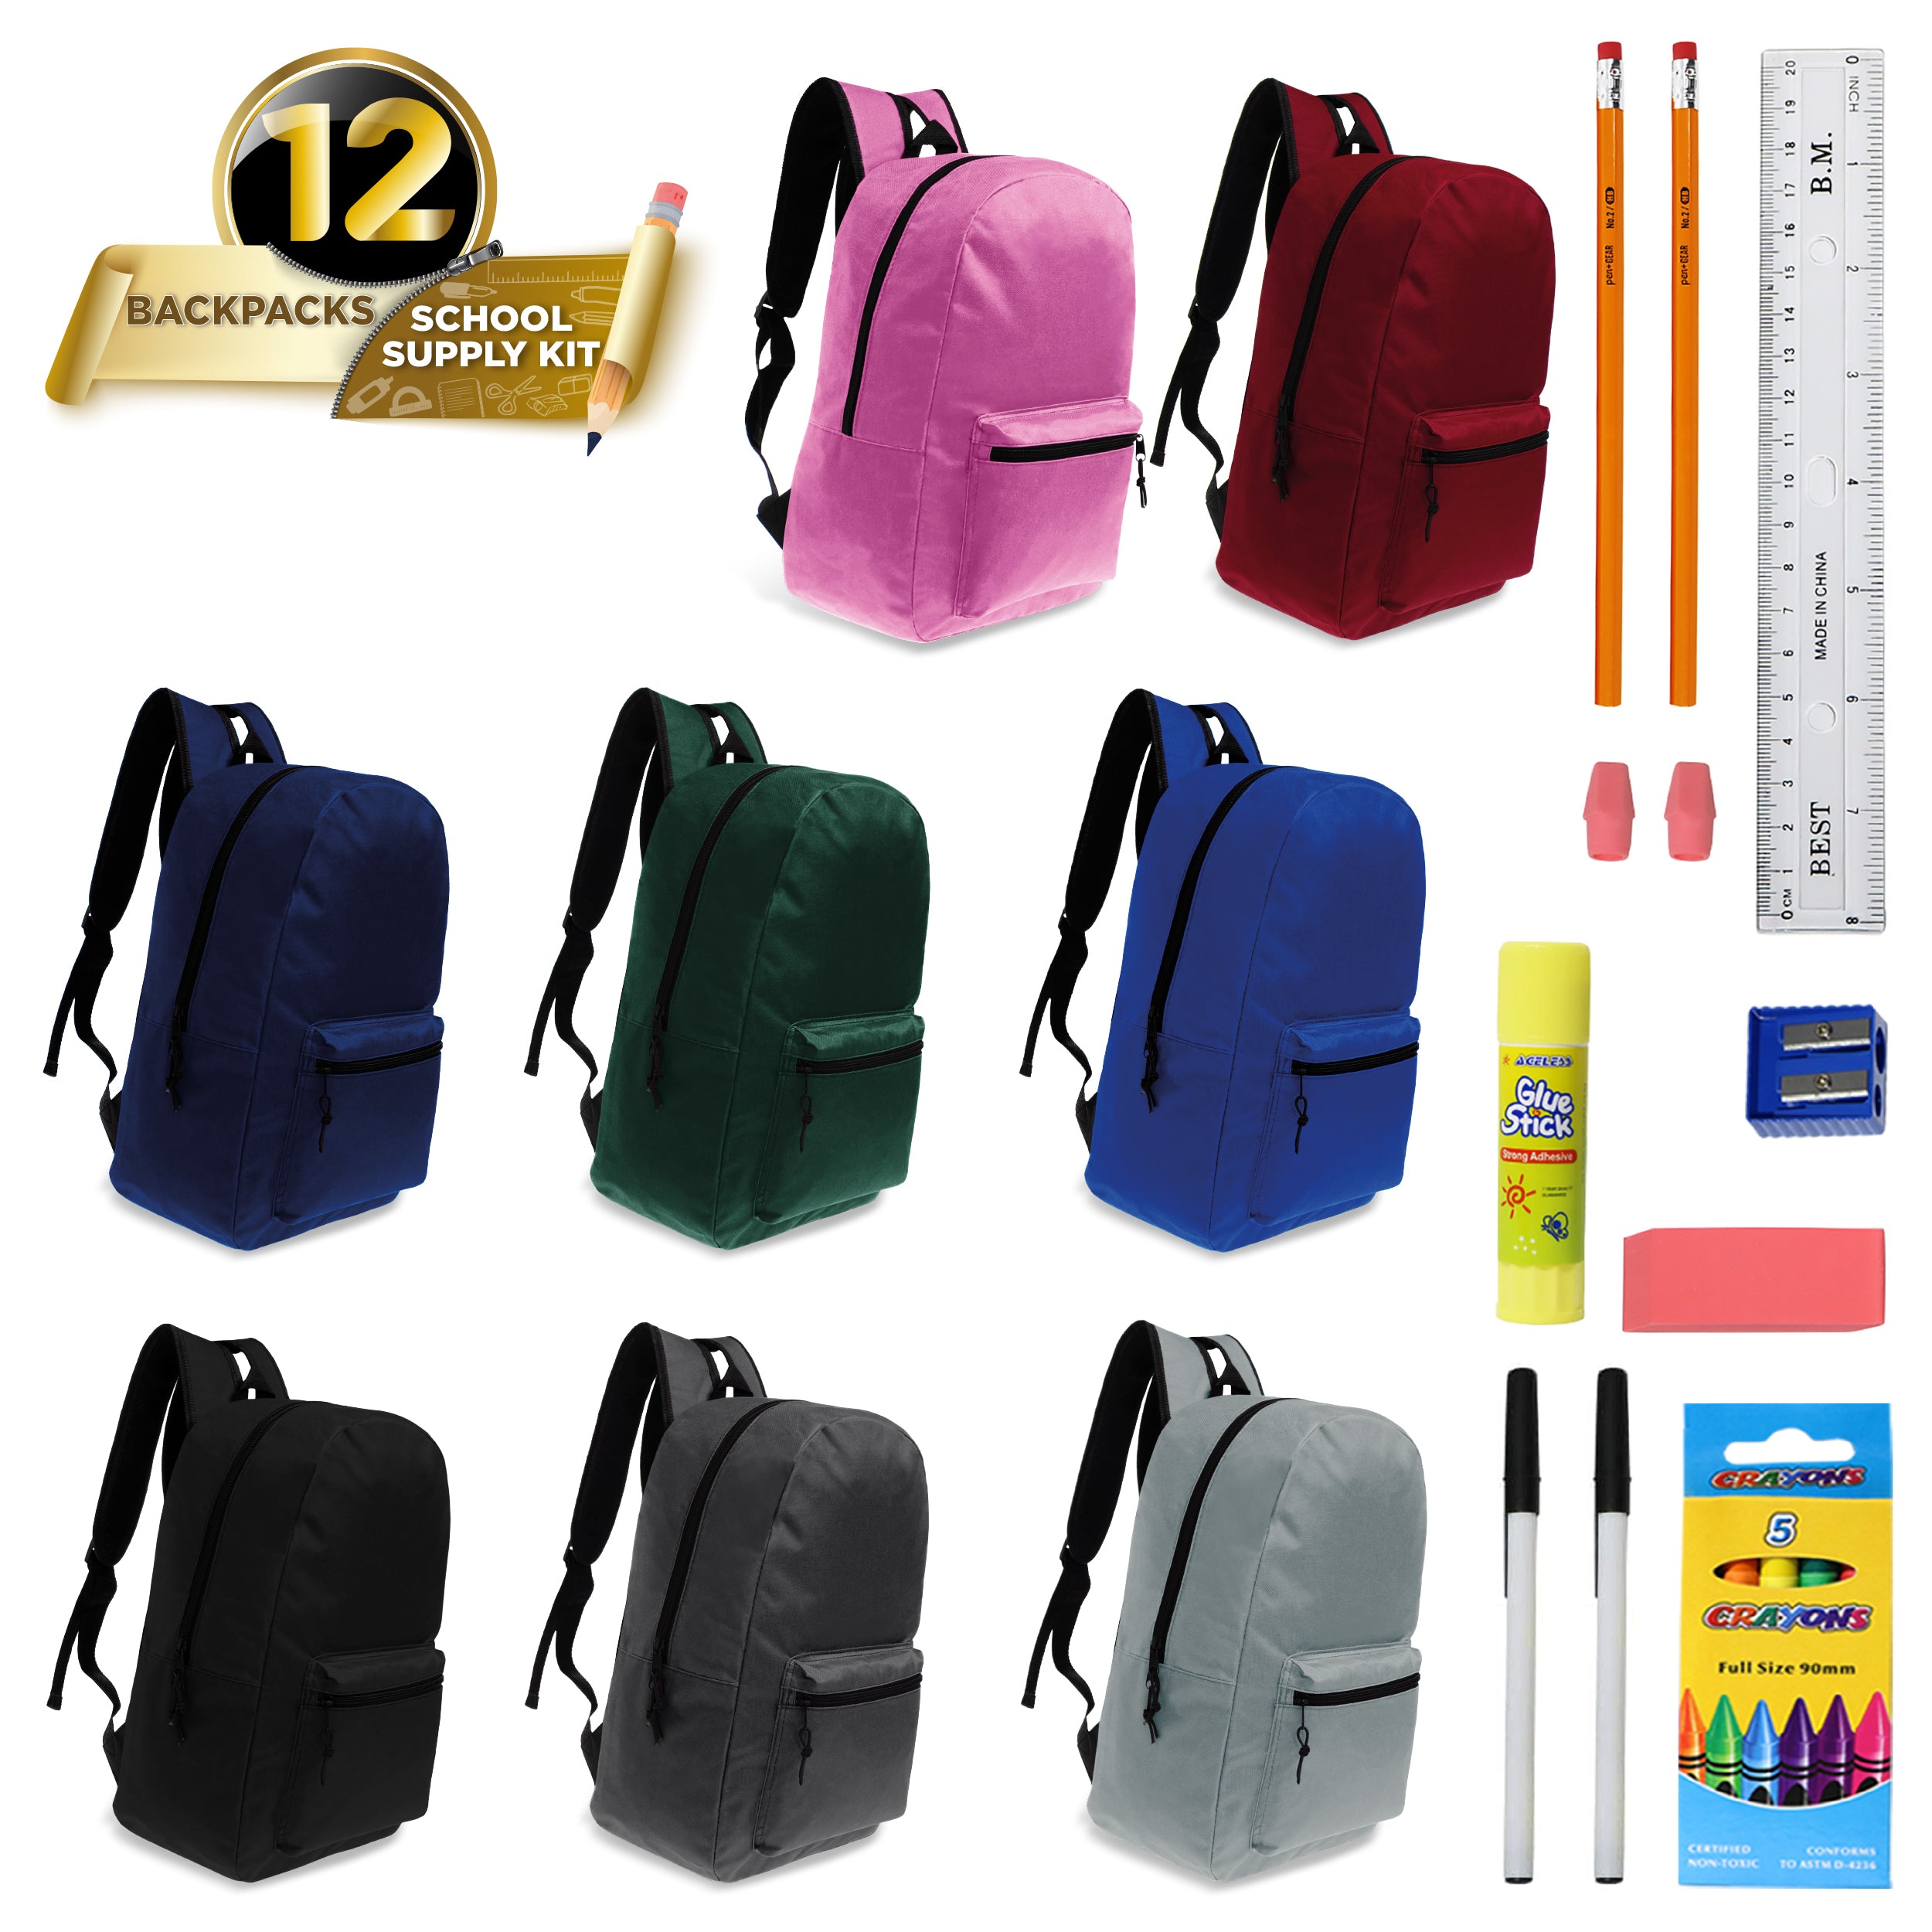 15 Inch Wholesale Backpacks in Assorted Colors with School Supply Kits Bulk - Kit of 12